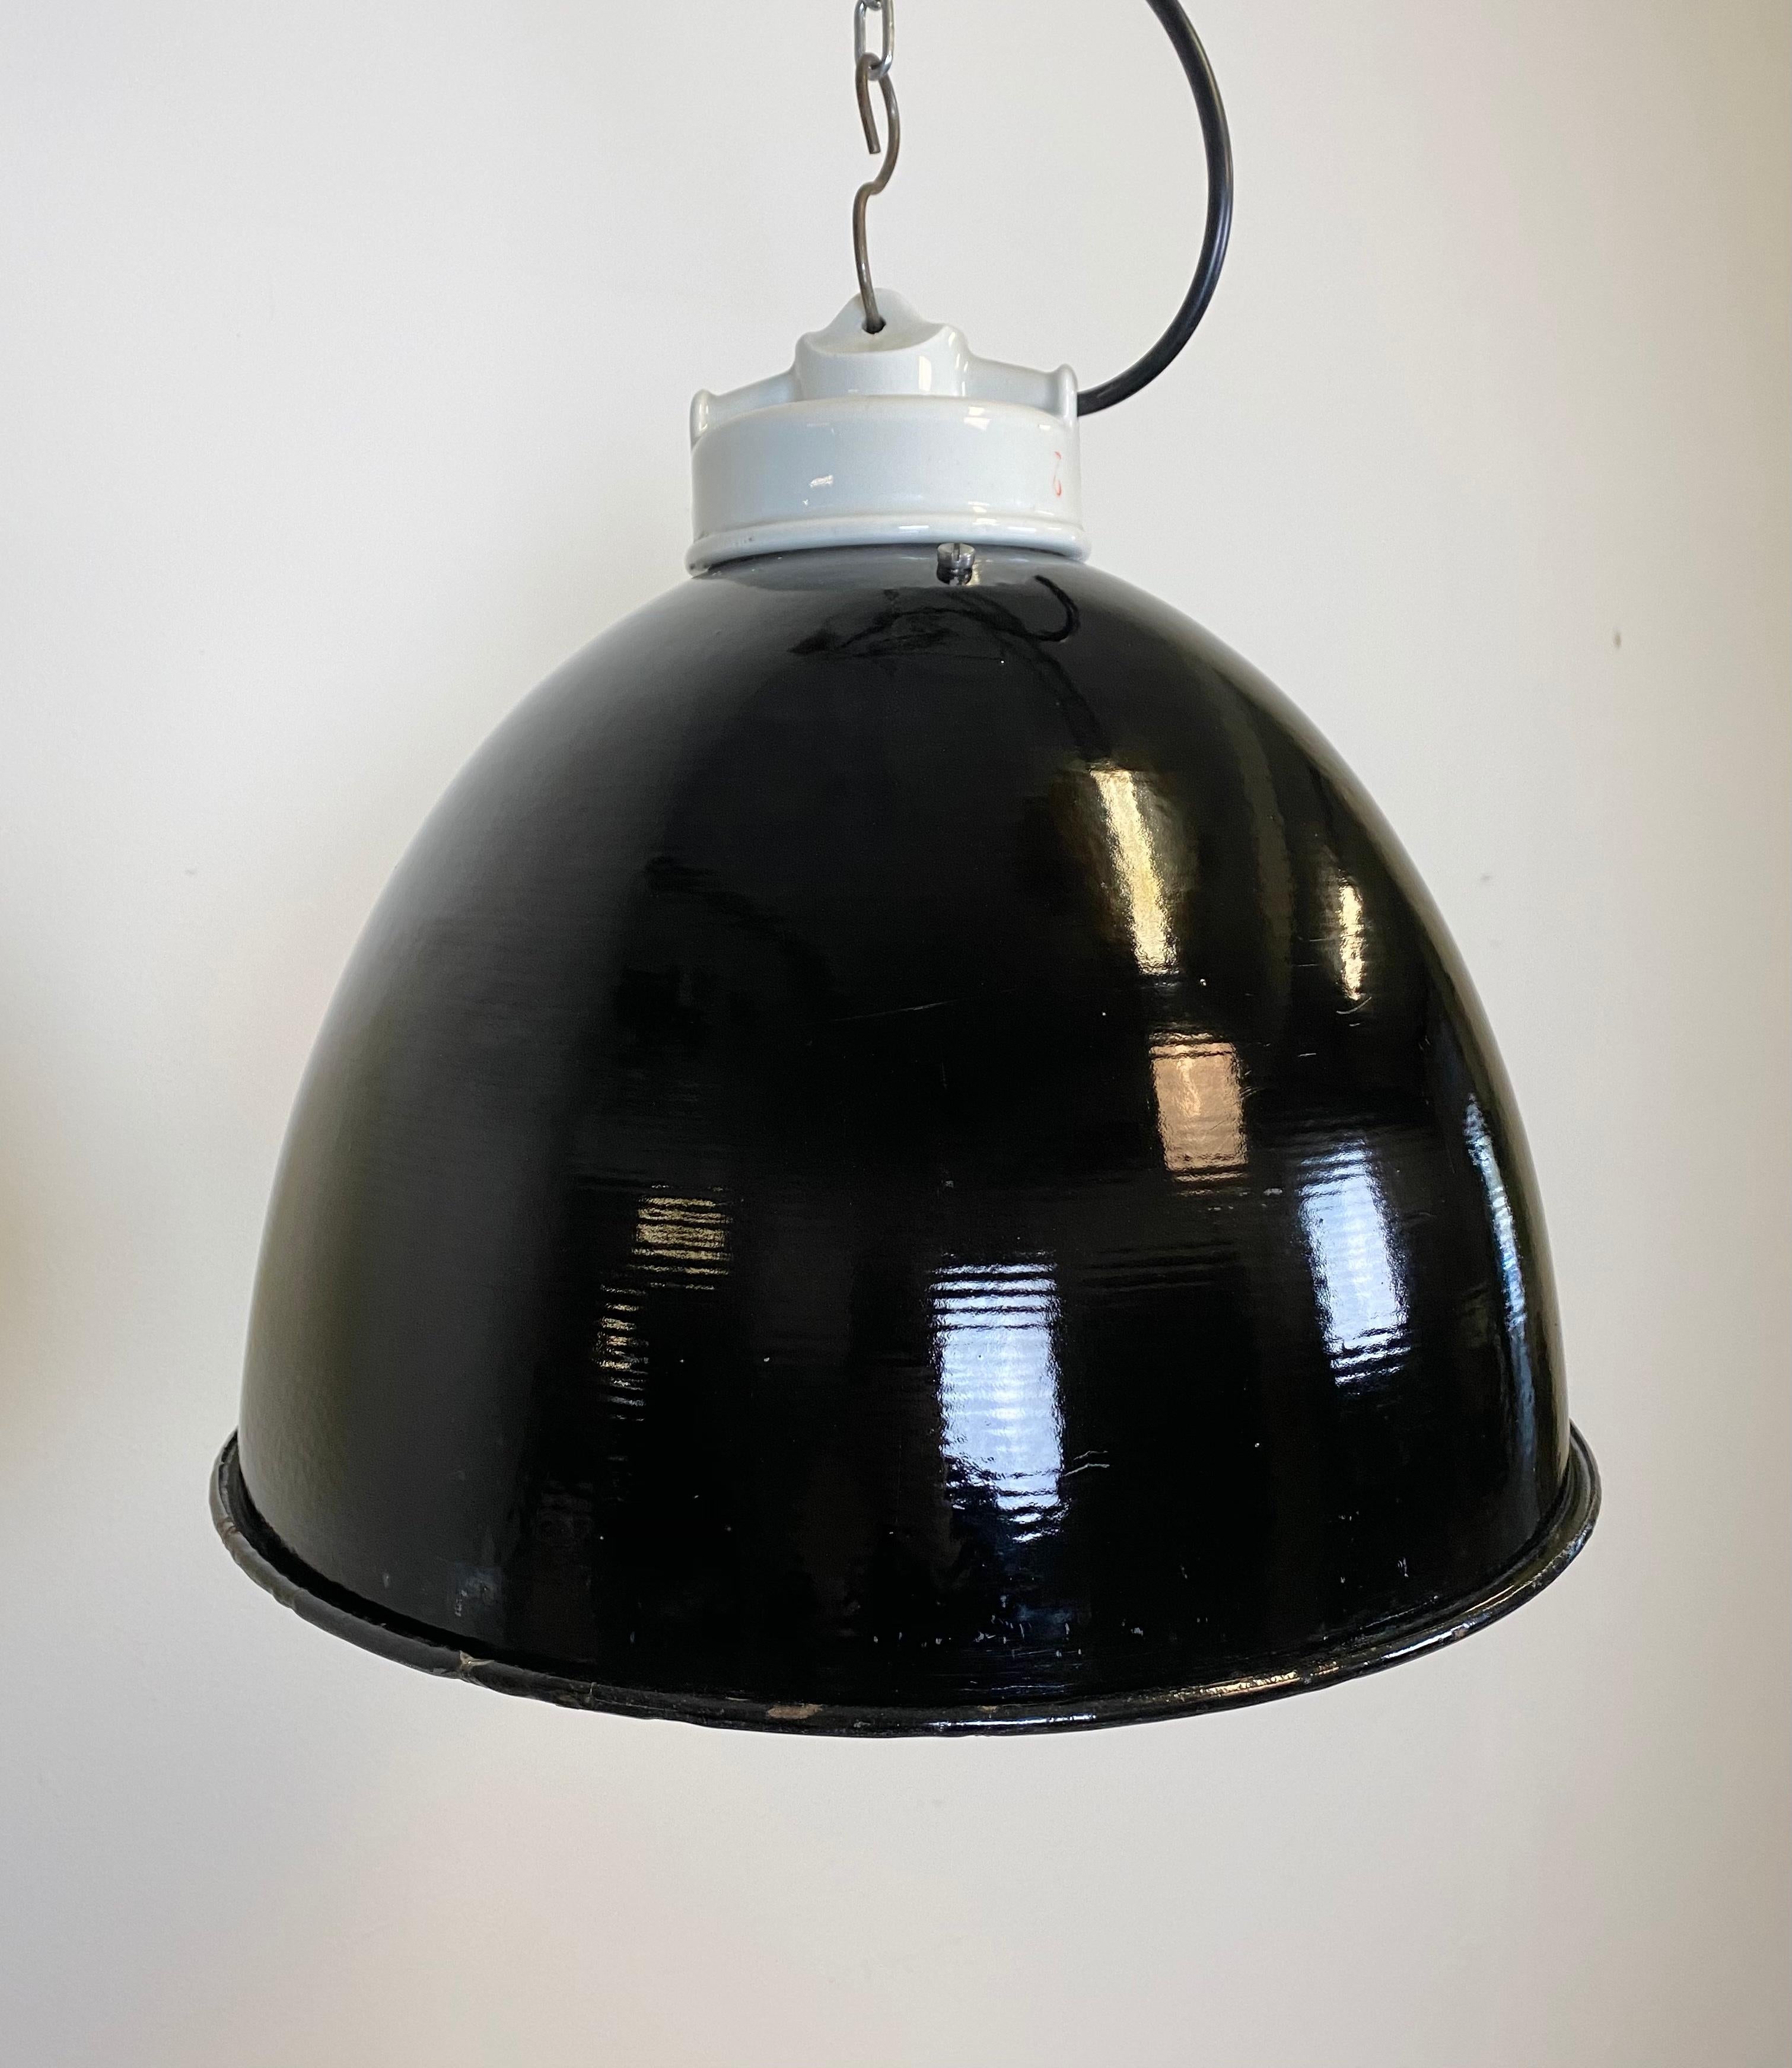 - Industrial lamp made during the 1950s
- Black enamel shade, white enamel interior
- Porcelain top with glass cover
- Socket for E 27 lightbulbs, new wire
- The weight of the lamp is 3 kg.